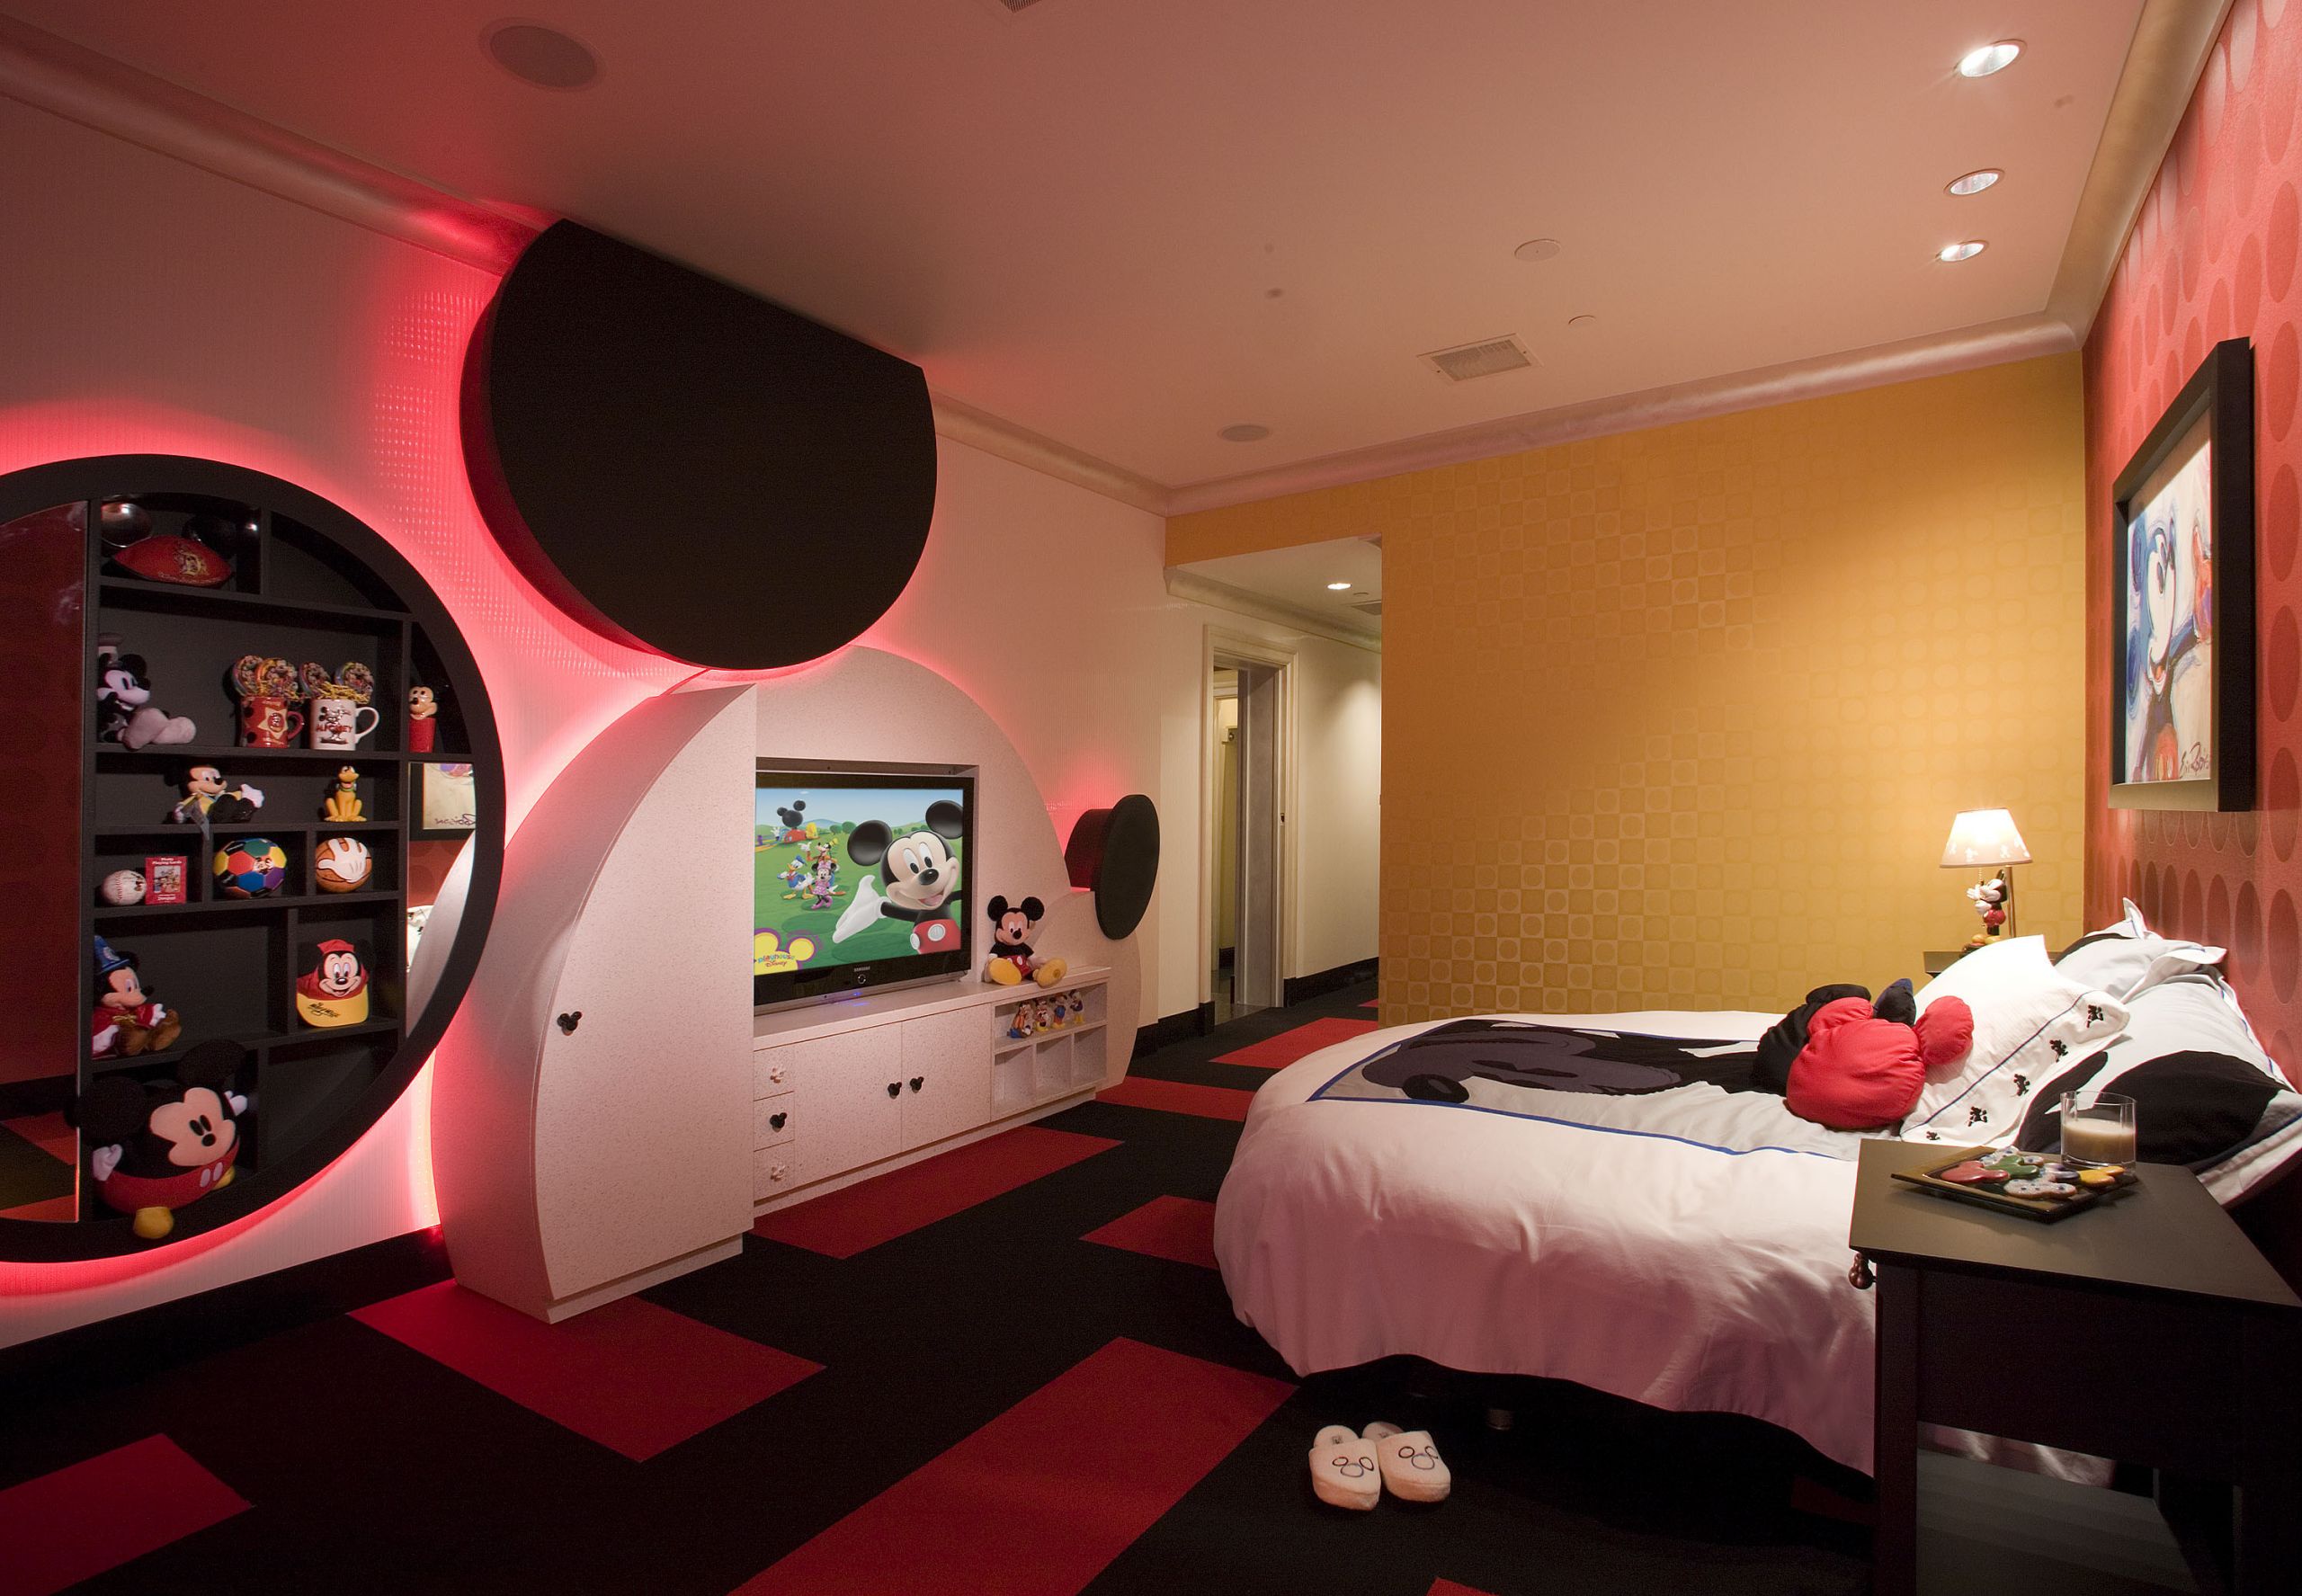 Kids Hotel Room
 5 Incredible Cartoon Hotel Rooms for Kids and Kids at